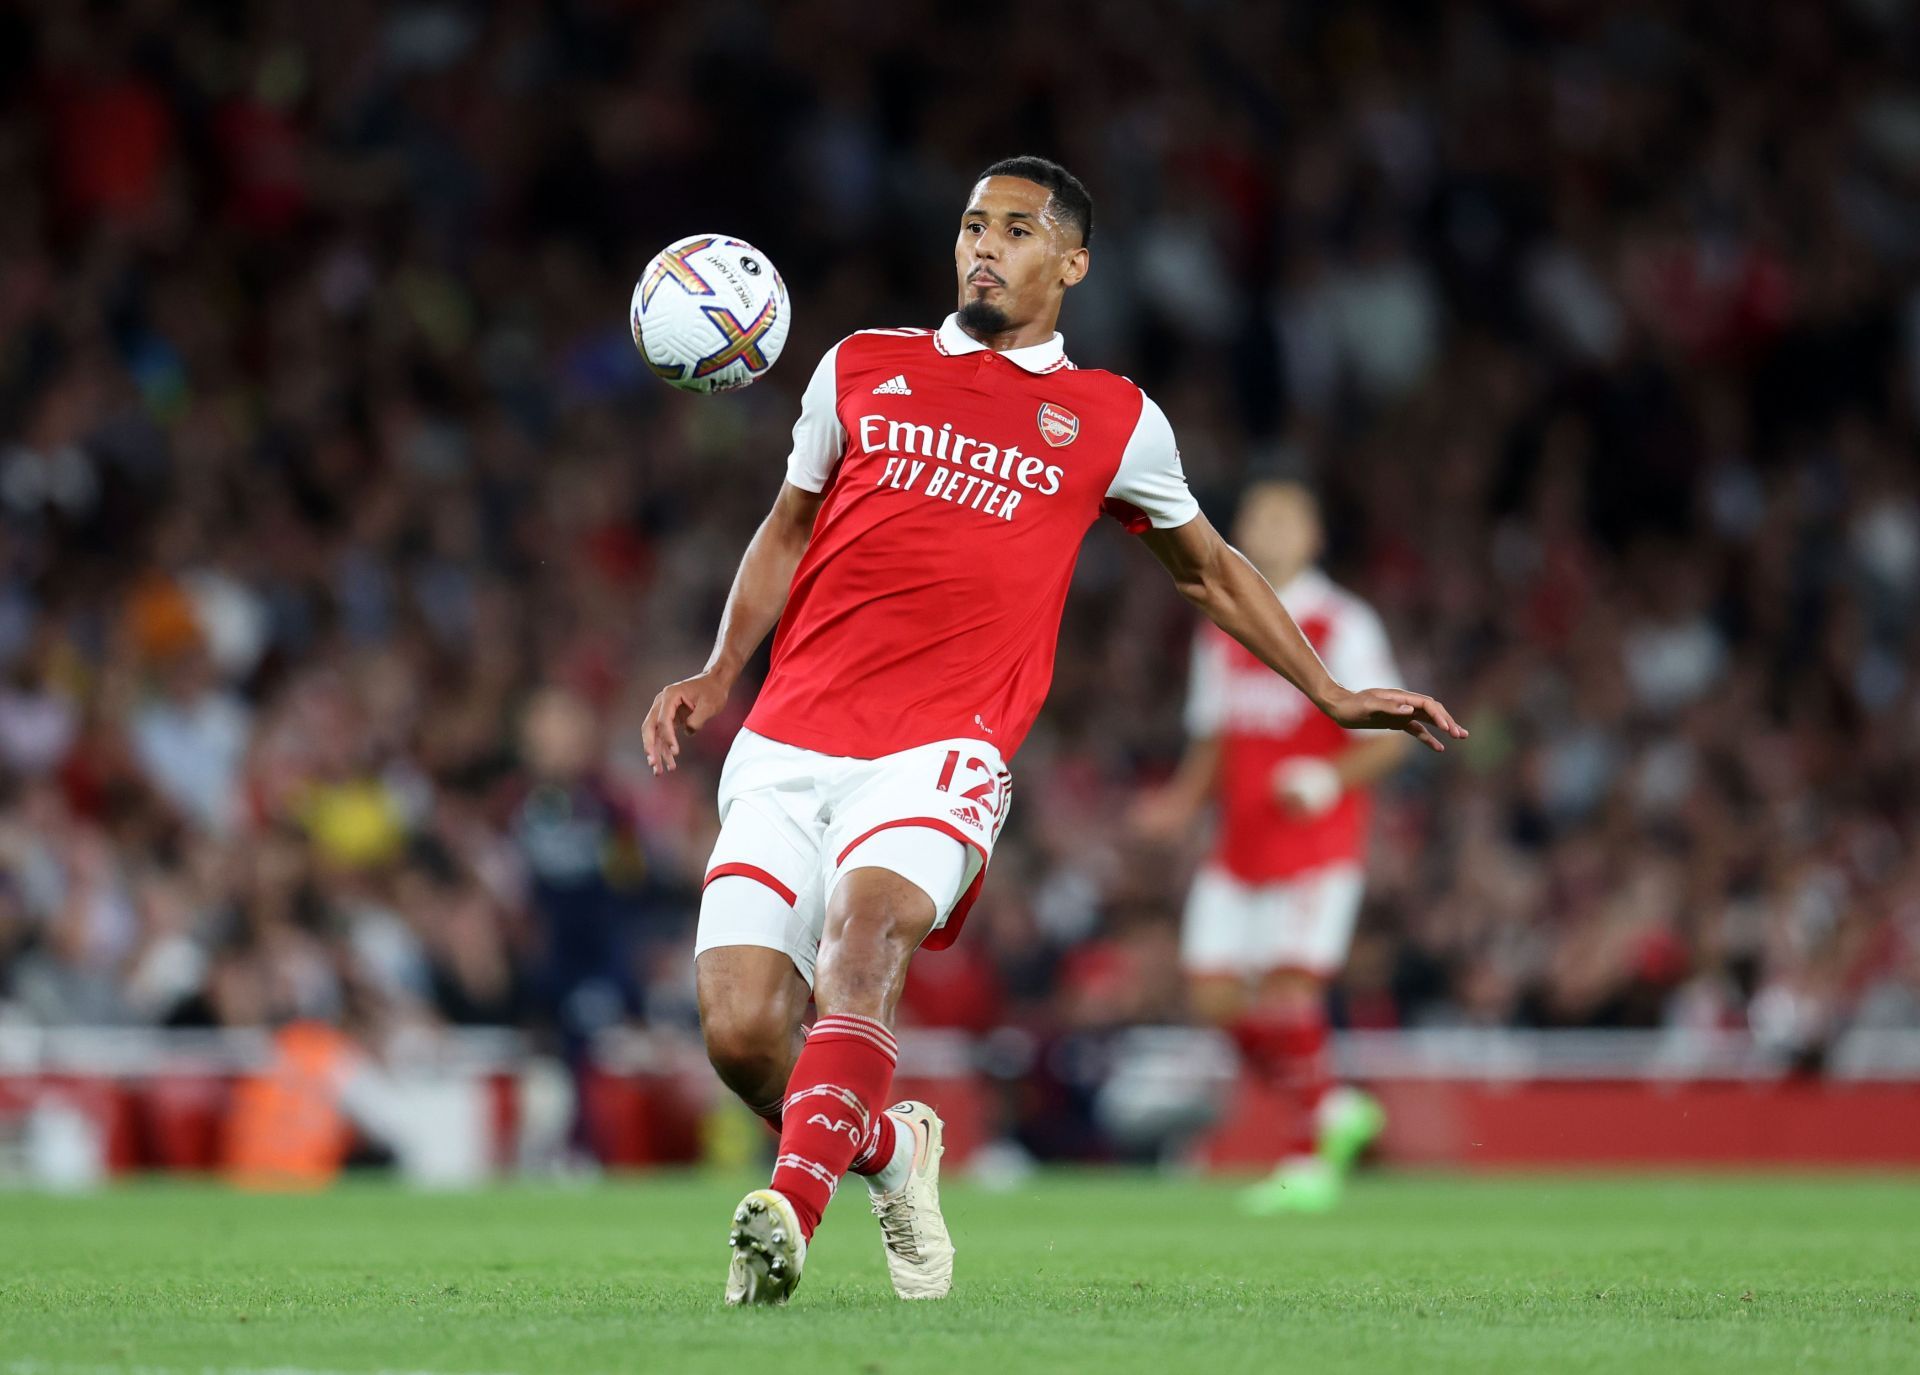 Saliba has been a difference-maker for the Gunners this season.